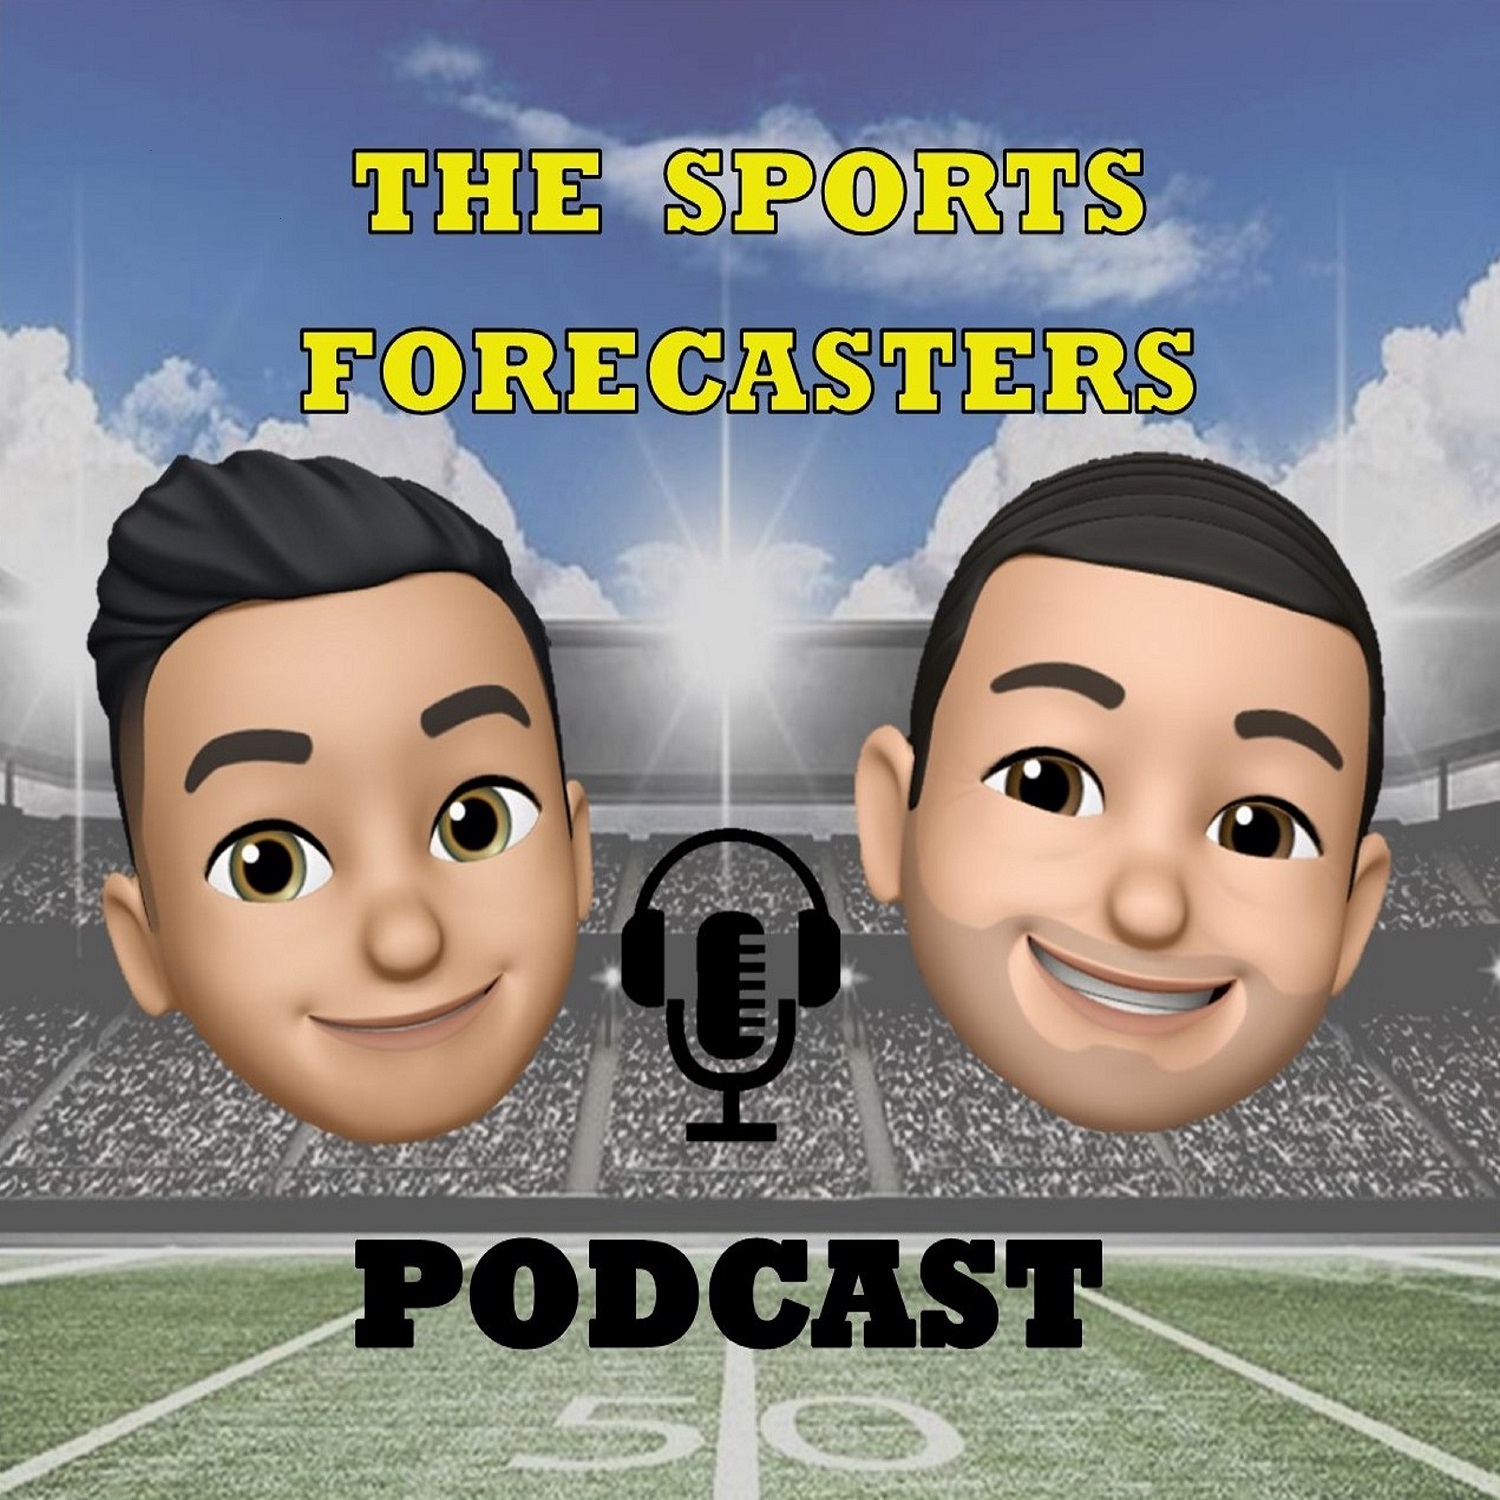 The Sports Forecasters